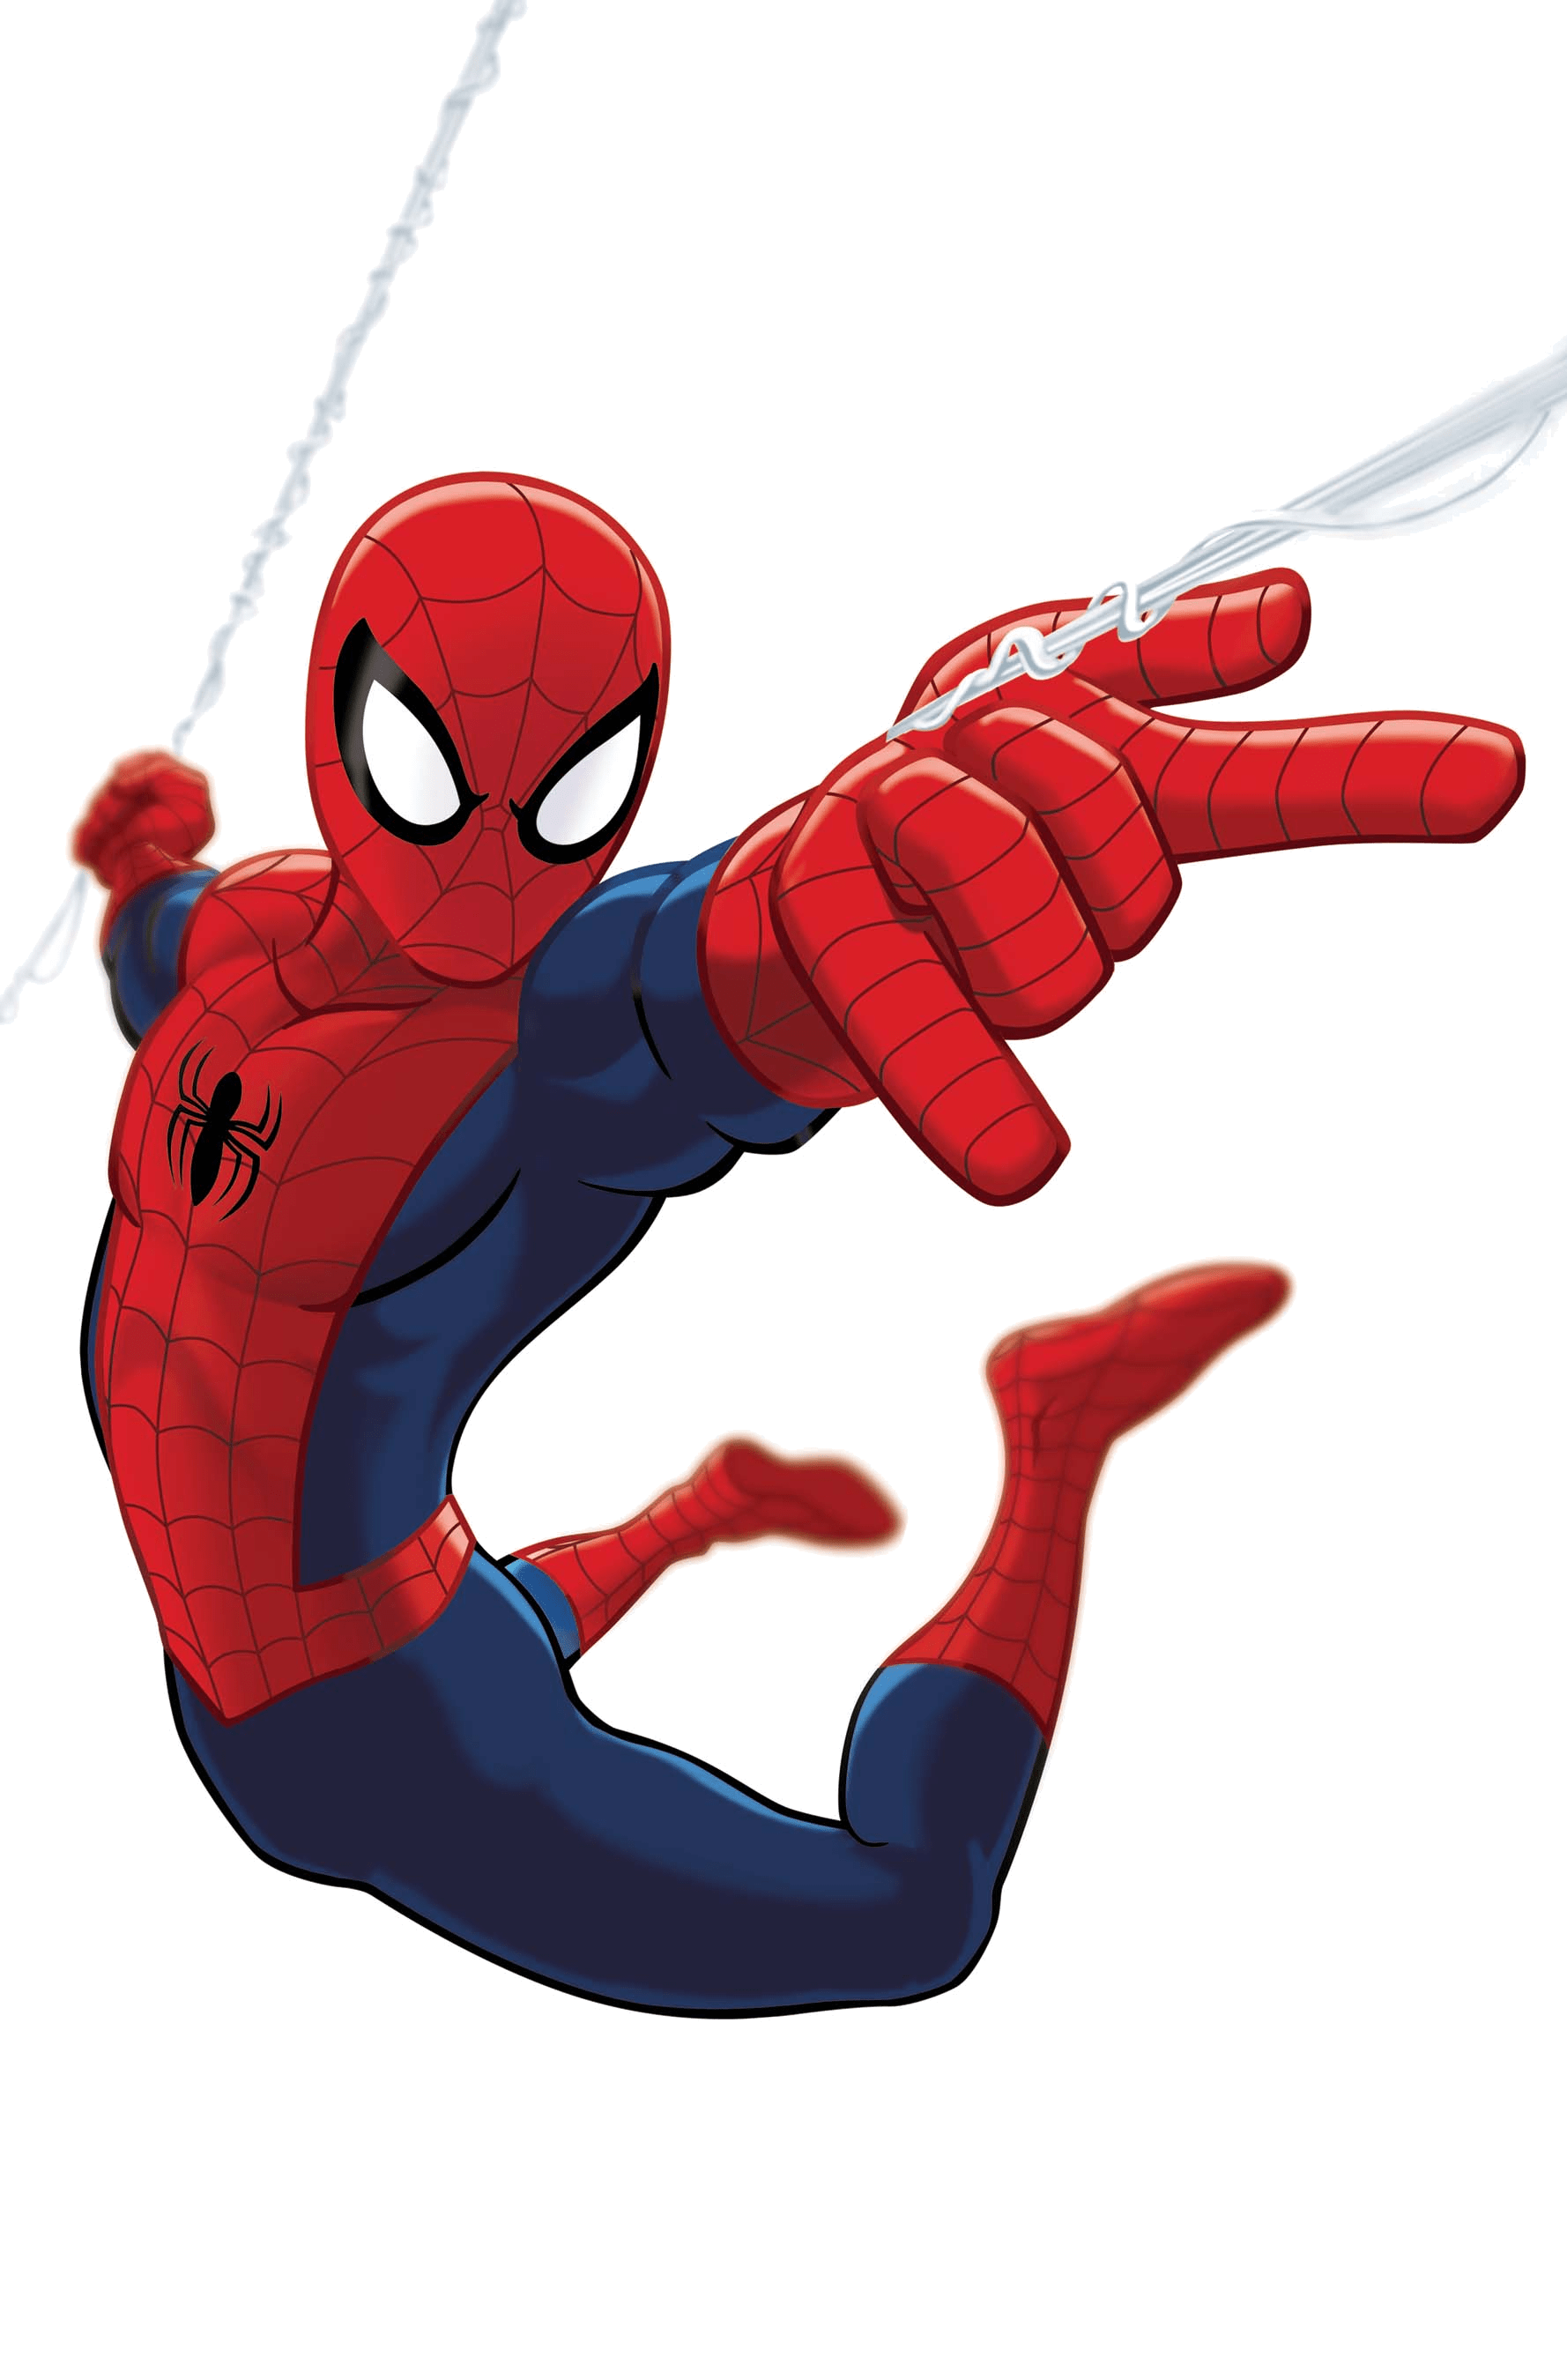 Spiderman, Comic, Film, Characters File PNG Transparent Background, Free  Download #47360 - FreeIconsPNG